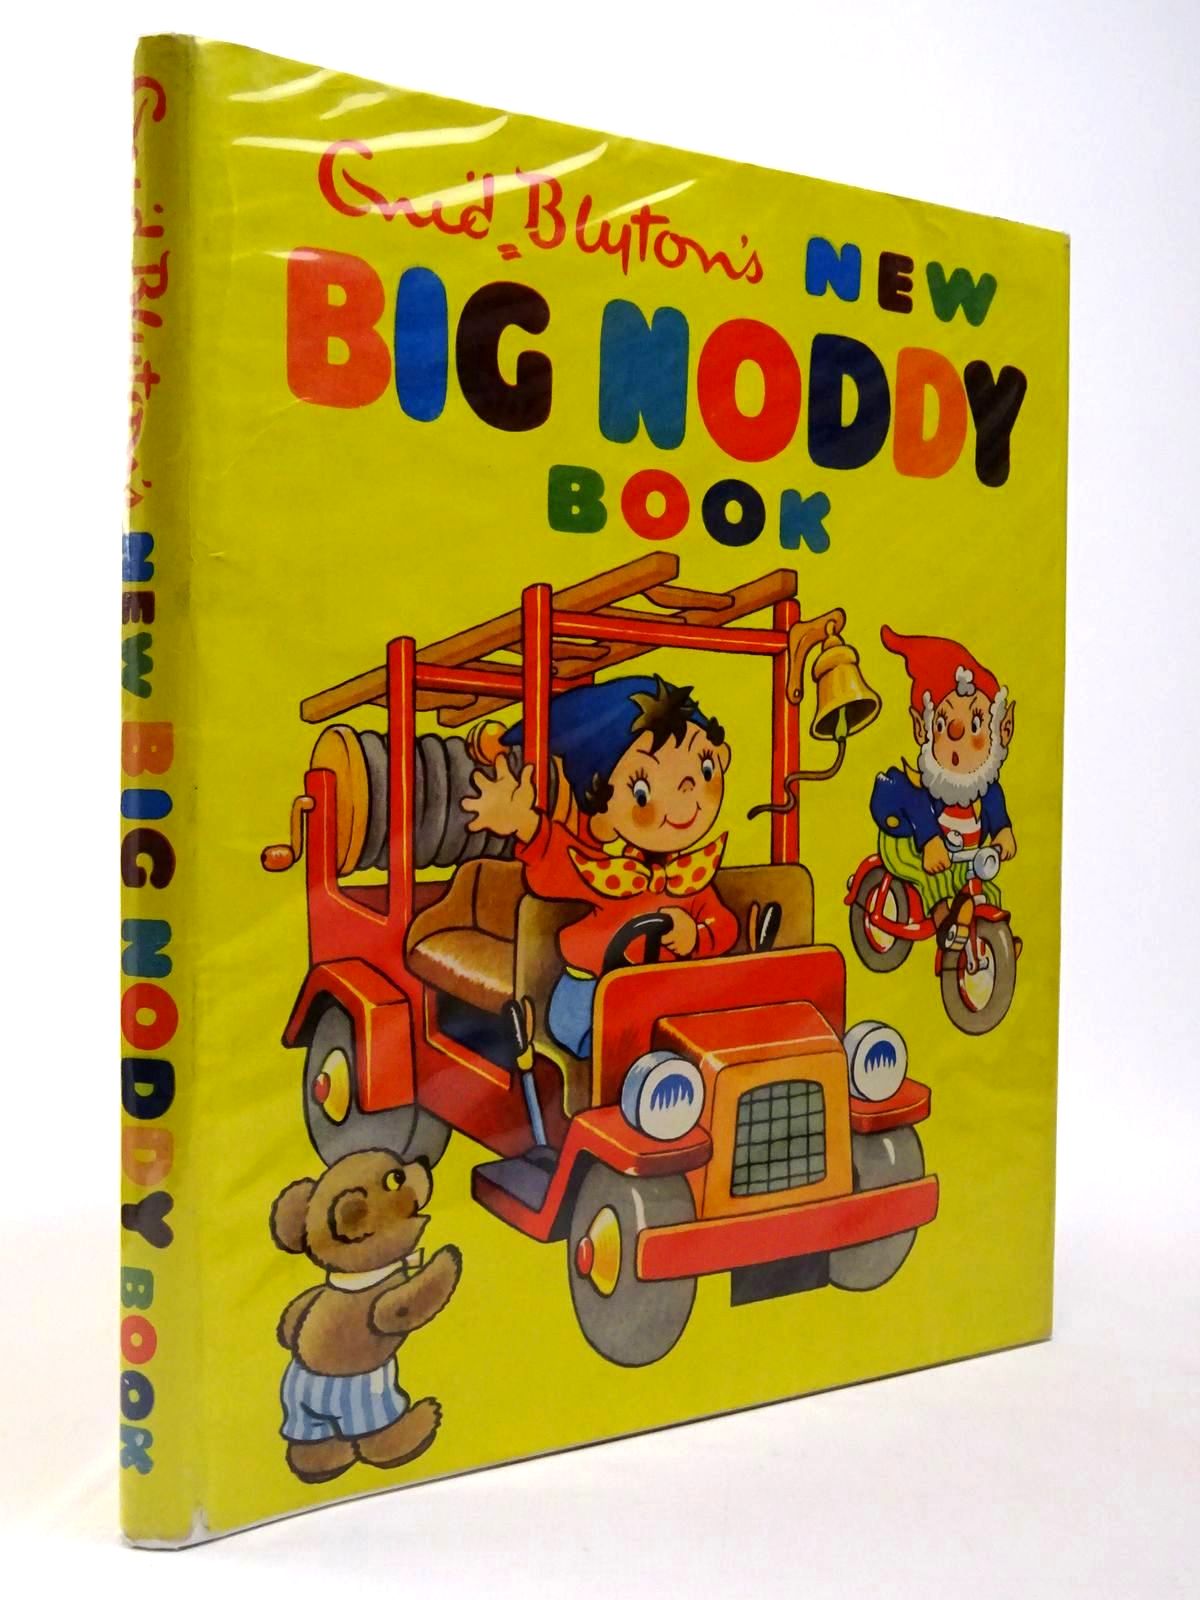 Cover of THE NEW BIG NODDY BOOK by Enid Blyton